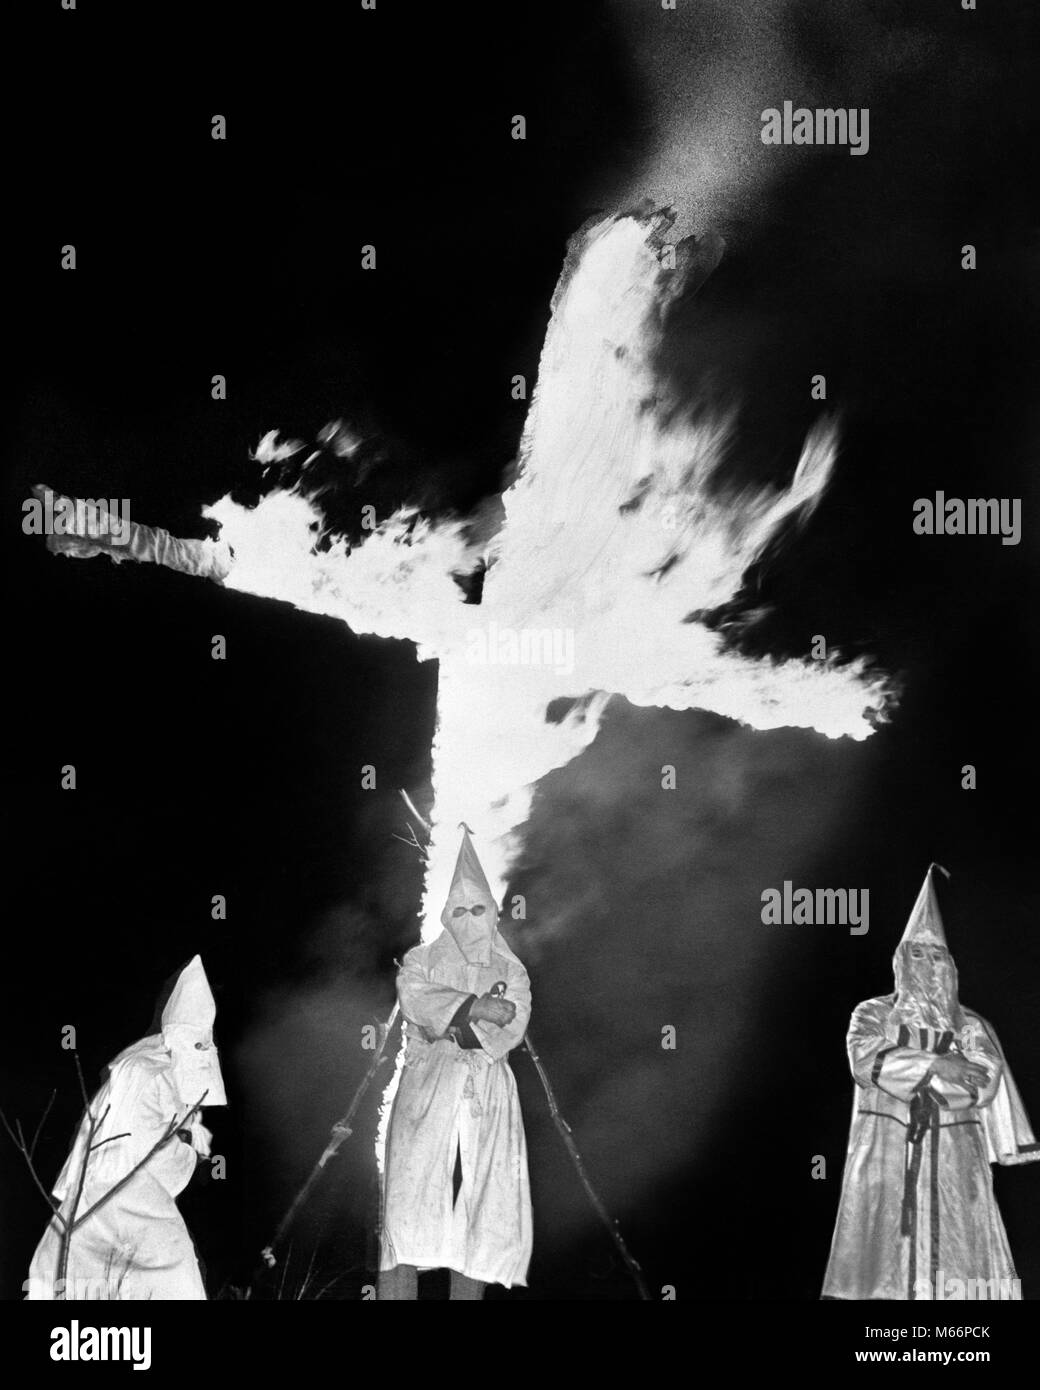 1930s HOODED MEMBERS OF KKK KU KLUX KLAN STANDING IN FRONT OF BURNING CROSS - q73548 CPC001 HARS SINGLE OBJECT PHYSICAL ROBES NATIONALISM SOCIETY AUTHORITY HOODED POLITICS SOUTHERN TERROR 1860s TERRORISM VIOLENT SMALL GROUP OF PEOPLE ORGANIZATION SUPREMACY BASED MALES MURDER RIGHT-WING TERRORIST ANTI-BLACK ANTI-IMMIGRANT ANTI-IMMIGRATION ANTI-JUDAISM ANTI-NEGRO ANTI-SEMITIC ANTI-SEMITISM ASSAULT B&W BLACK AND WHITE CAUCASIAN ETHNICITY EXTREMIST FAR RIGHT FIERY HATE HATEFUL HOODS INTOLERANCE INTOLERANT KKK KLAN KU KLUX KLAN OLD FASHIONED PERSONS RACISM RACIST REACTIONARY RECONSTRUCTION Stock Photo